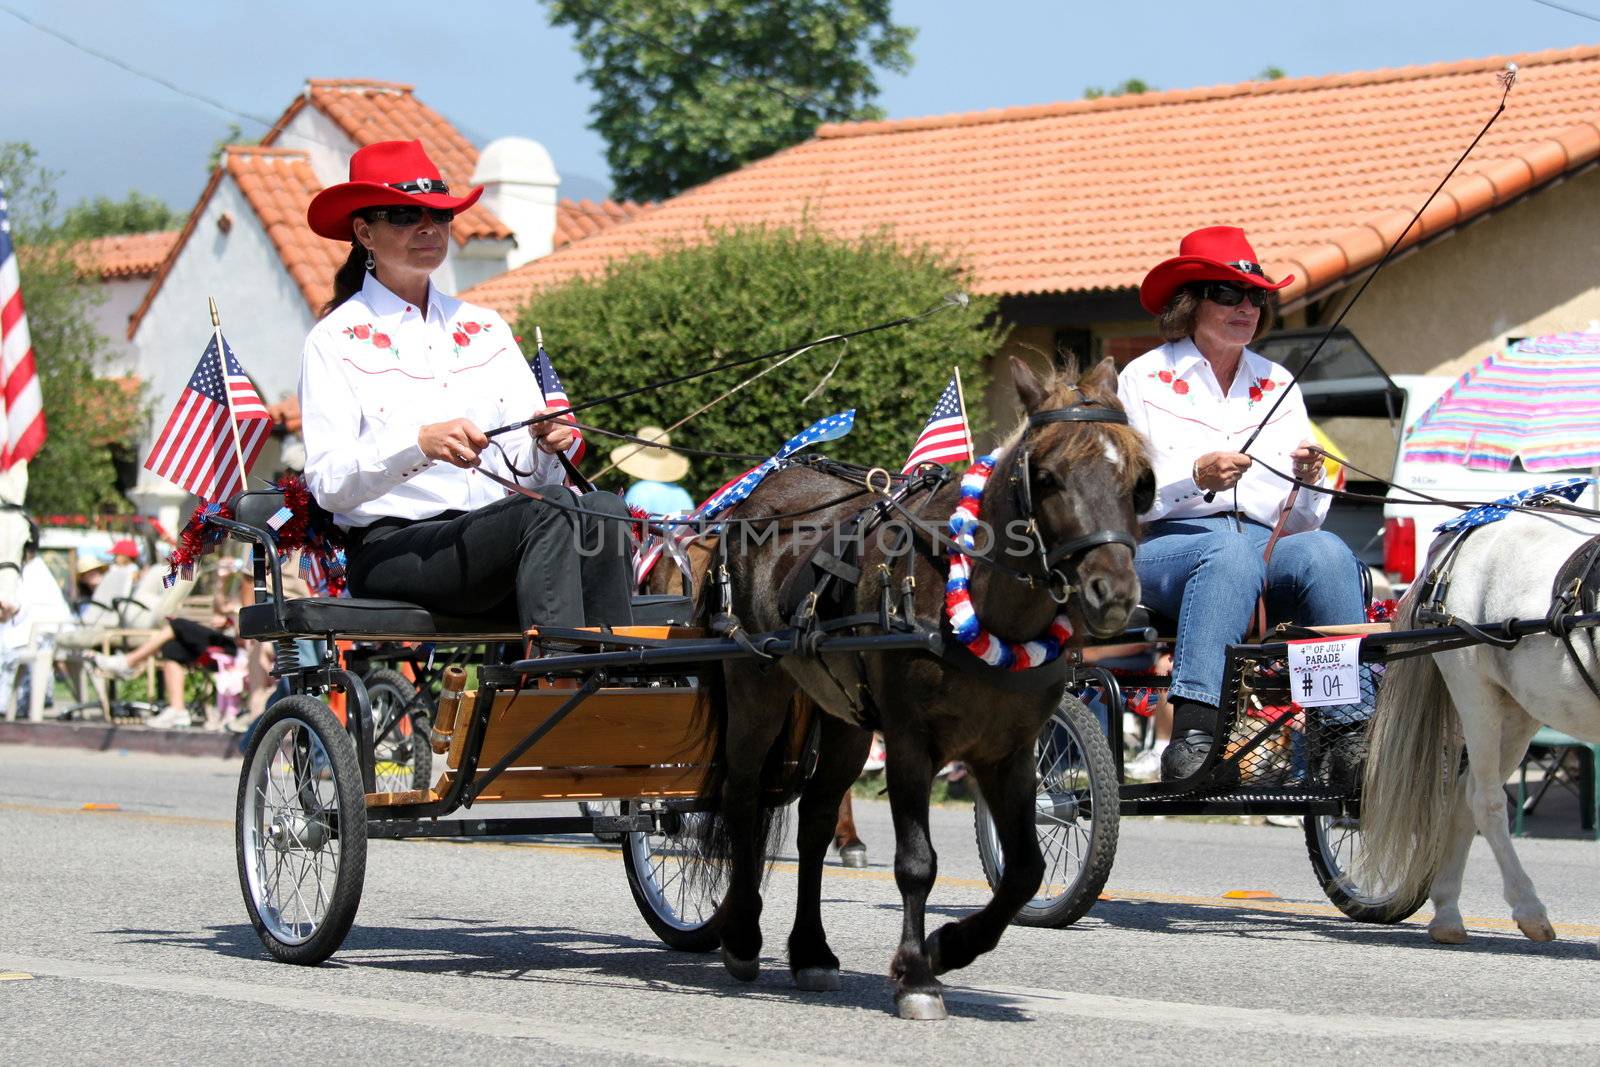 Ojai 4th of July Parade 2010 by hlehnerer